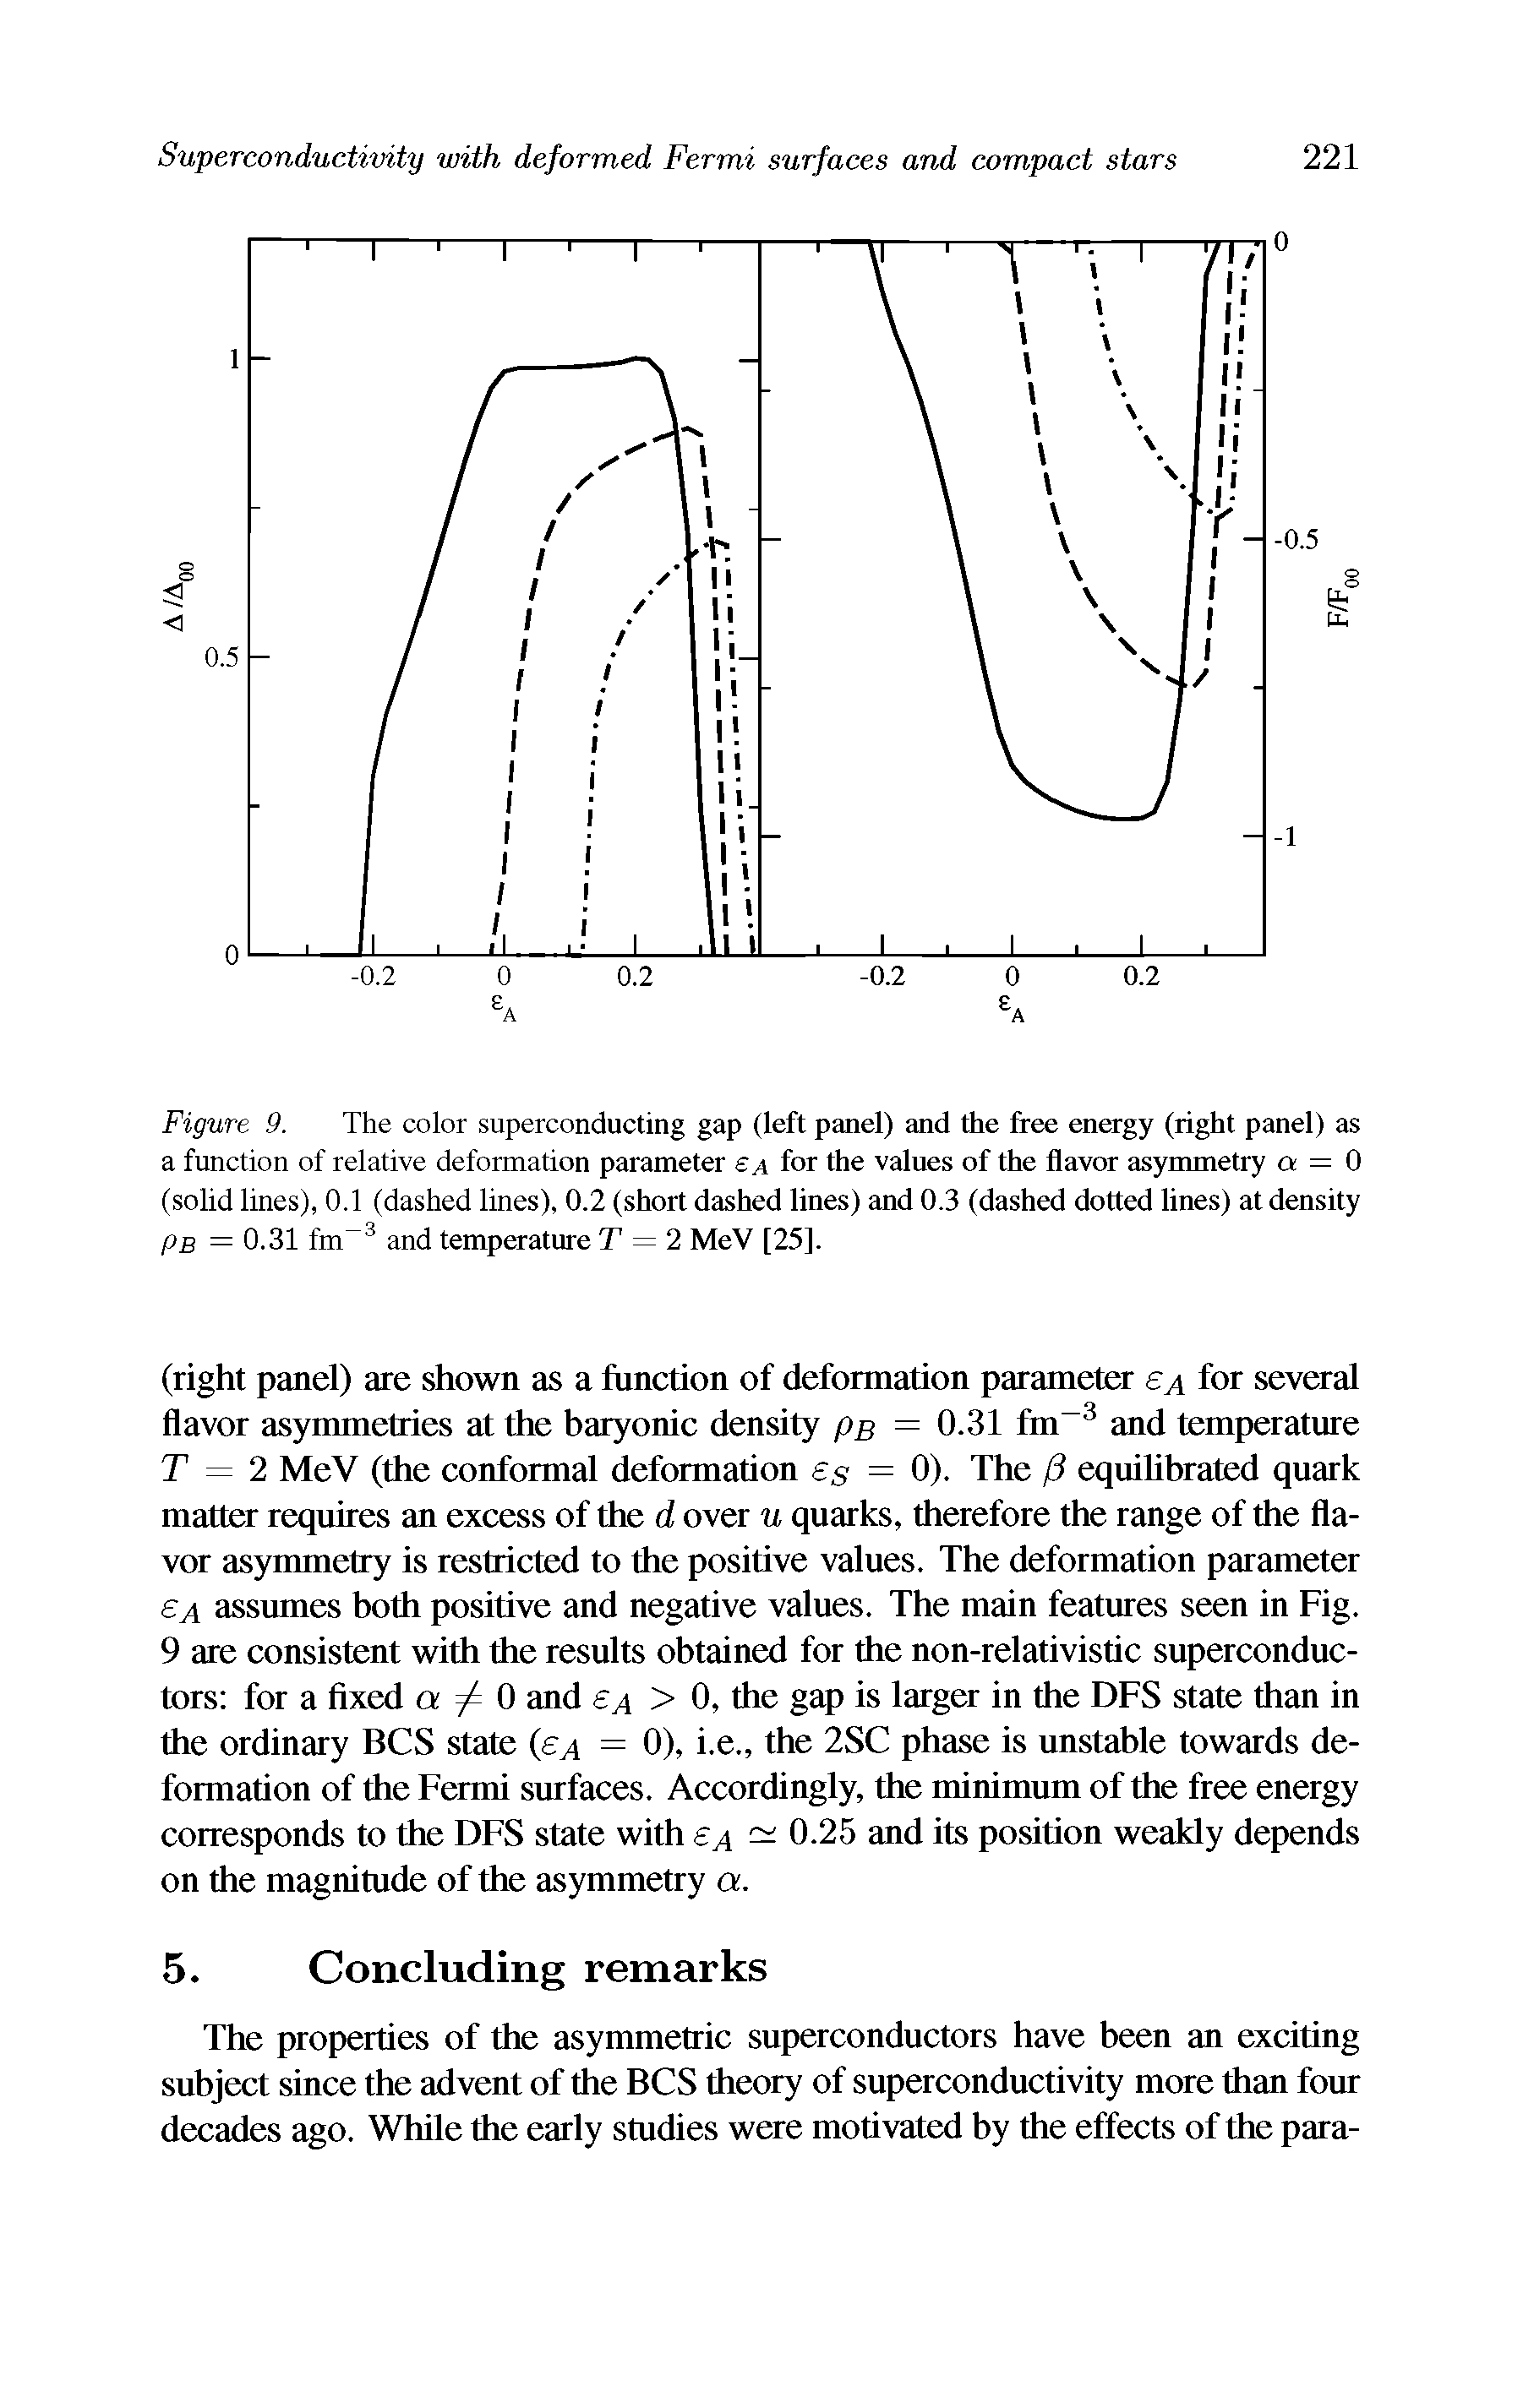 Figure 9. The color superconducting gap (left panel) and the free energy (right panel) as a function of relative deformation parameter a for the values of the flavor asymmetry a = 0 (solid lines), 0.1 (dashed lines), 0.2 (short dashed lines) and 0.3 (dashed dotted lines) at density pB = 0.31 I m 3 and temperature T = 2 MeV [25].